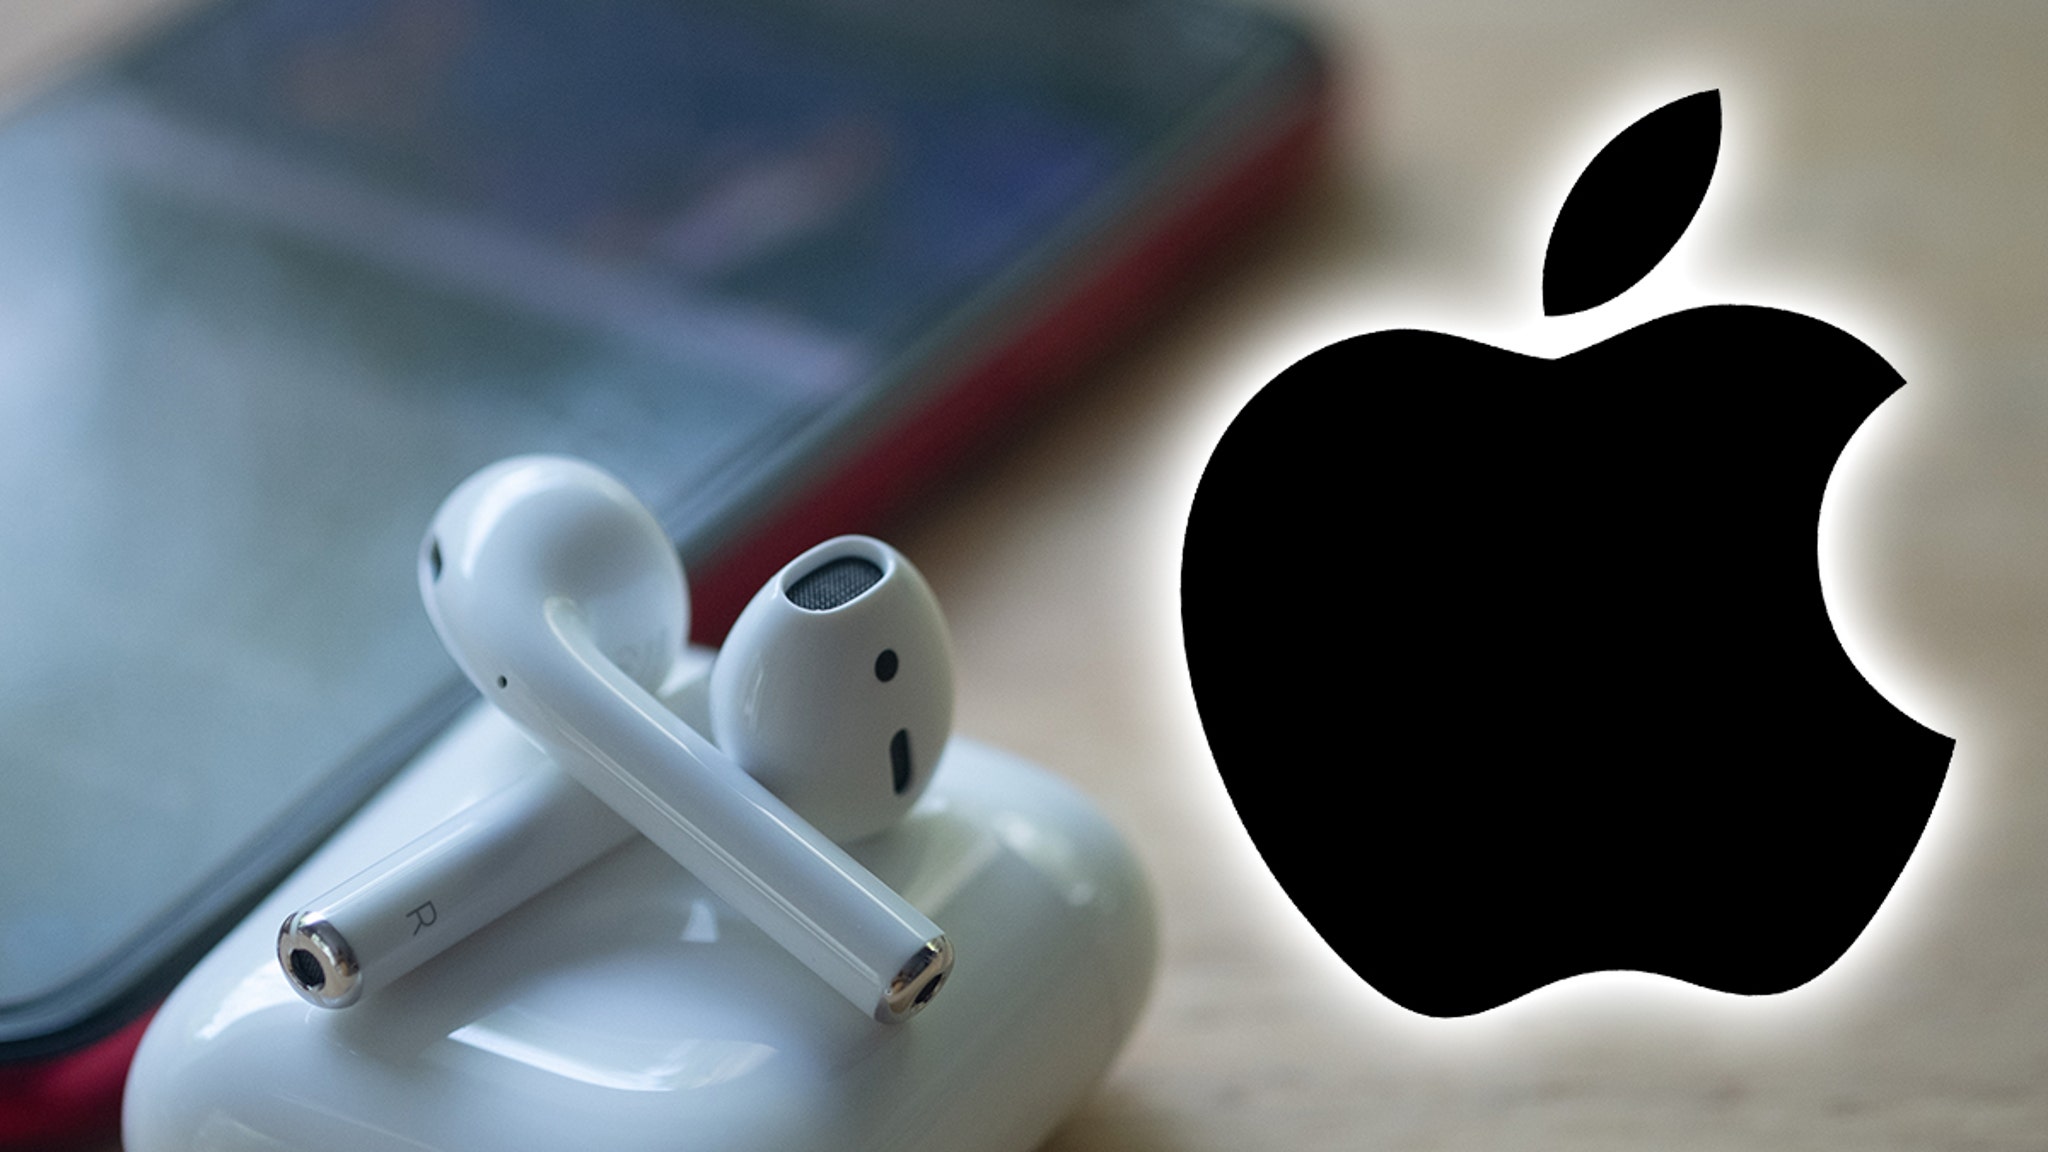 Family Sues Apple After AirPods Burst Eardrum During Amber Alert